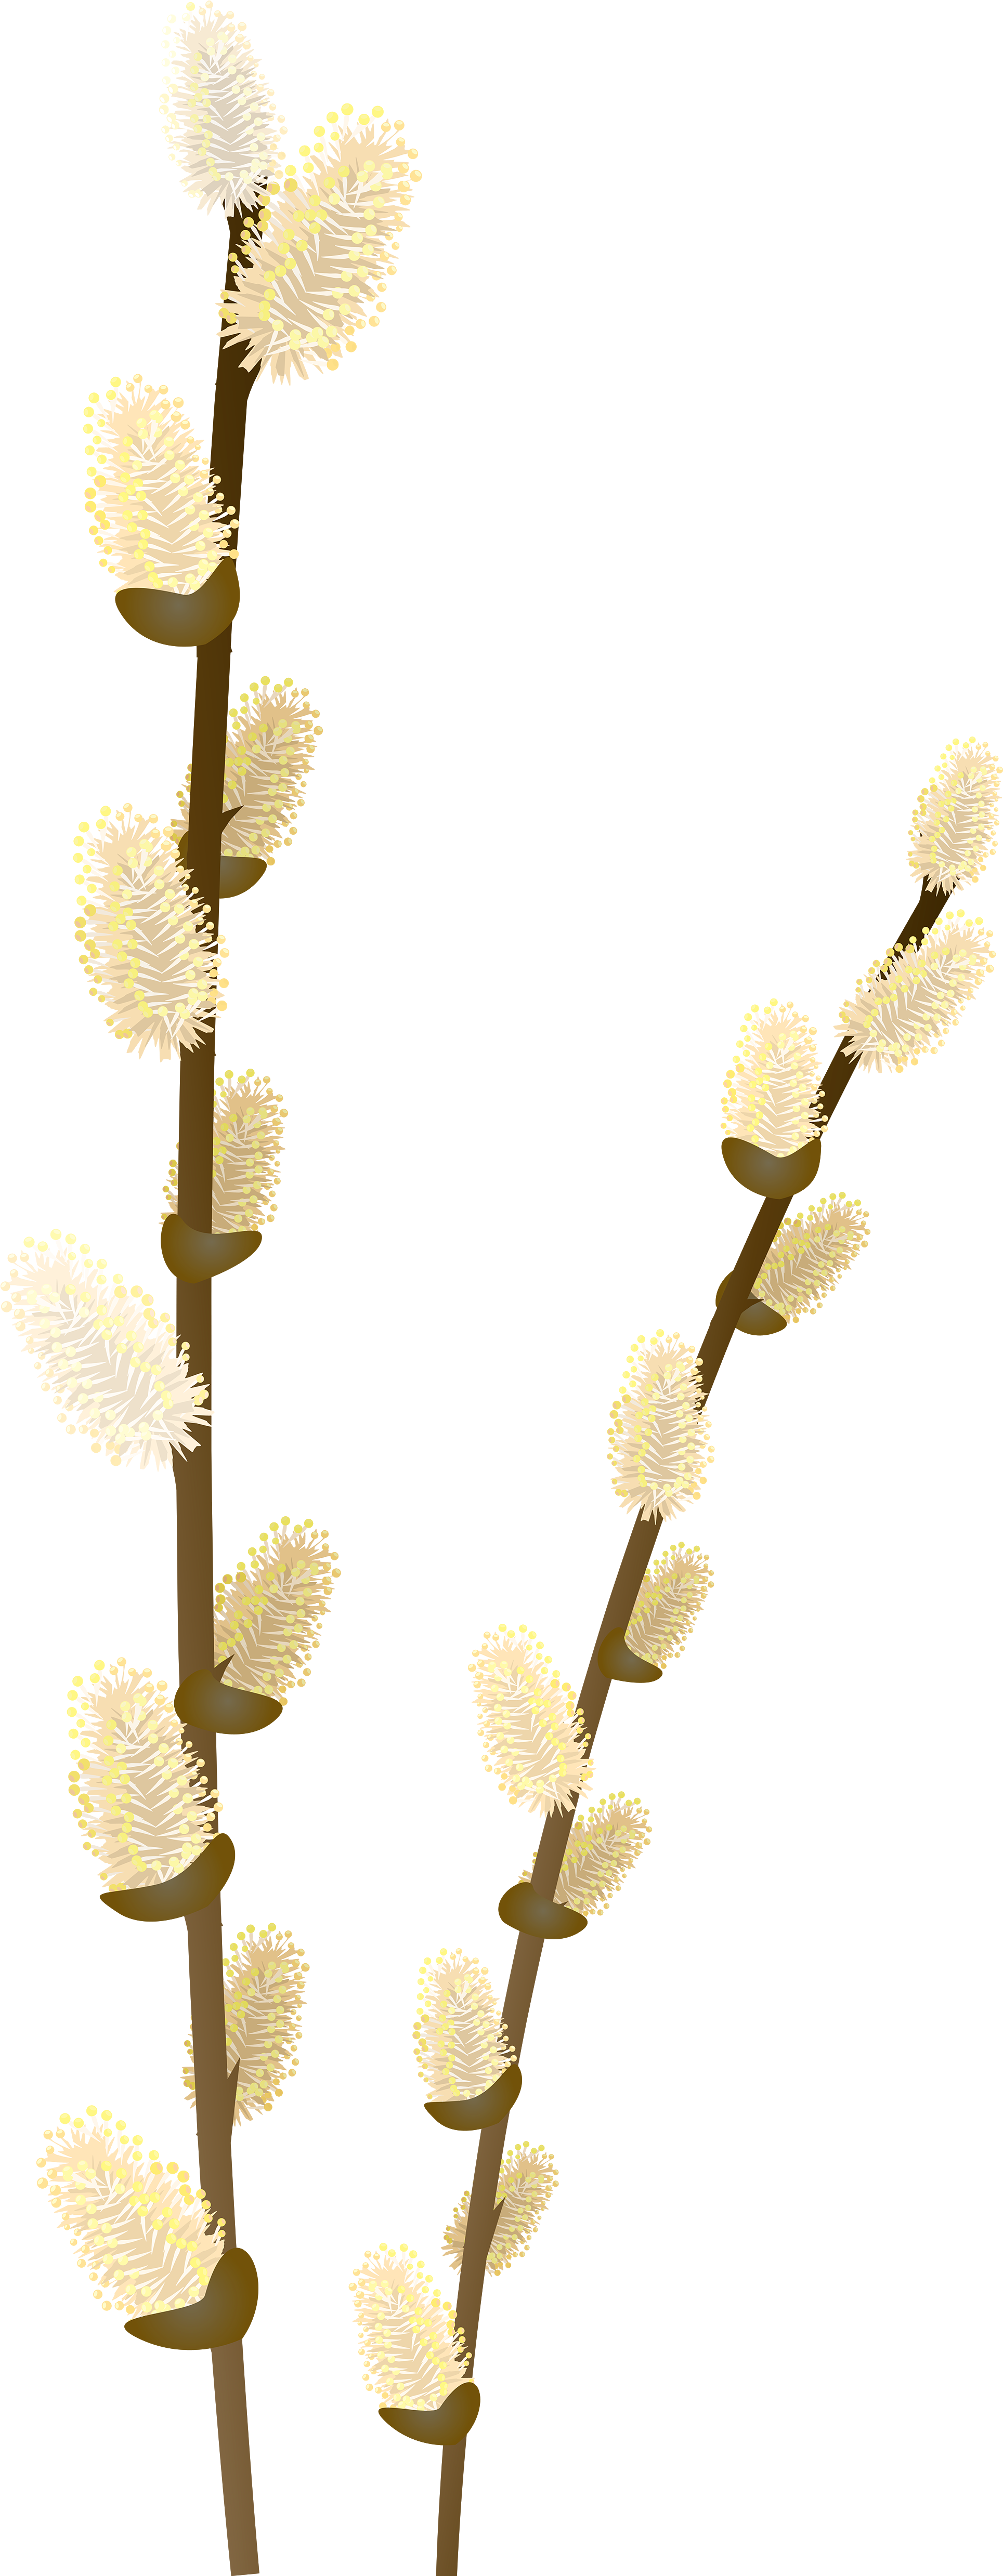 Willow Tree Branch Transparent Png Clip Art Image - Willow (2016x5000)